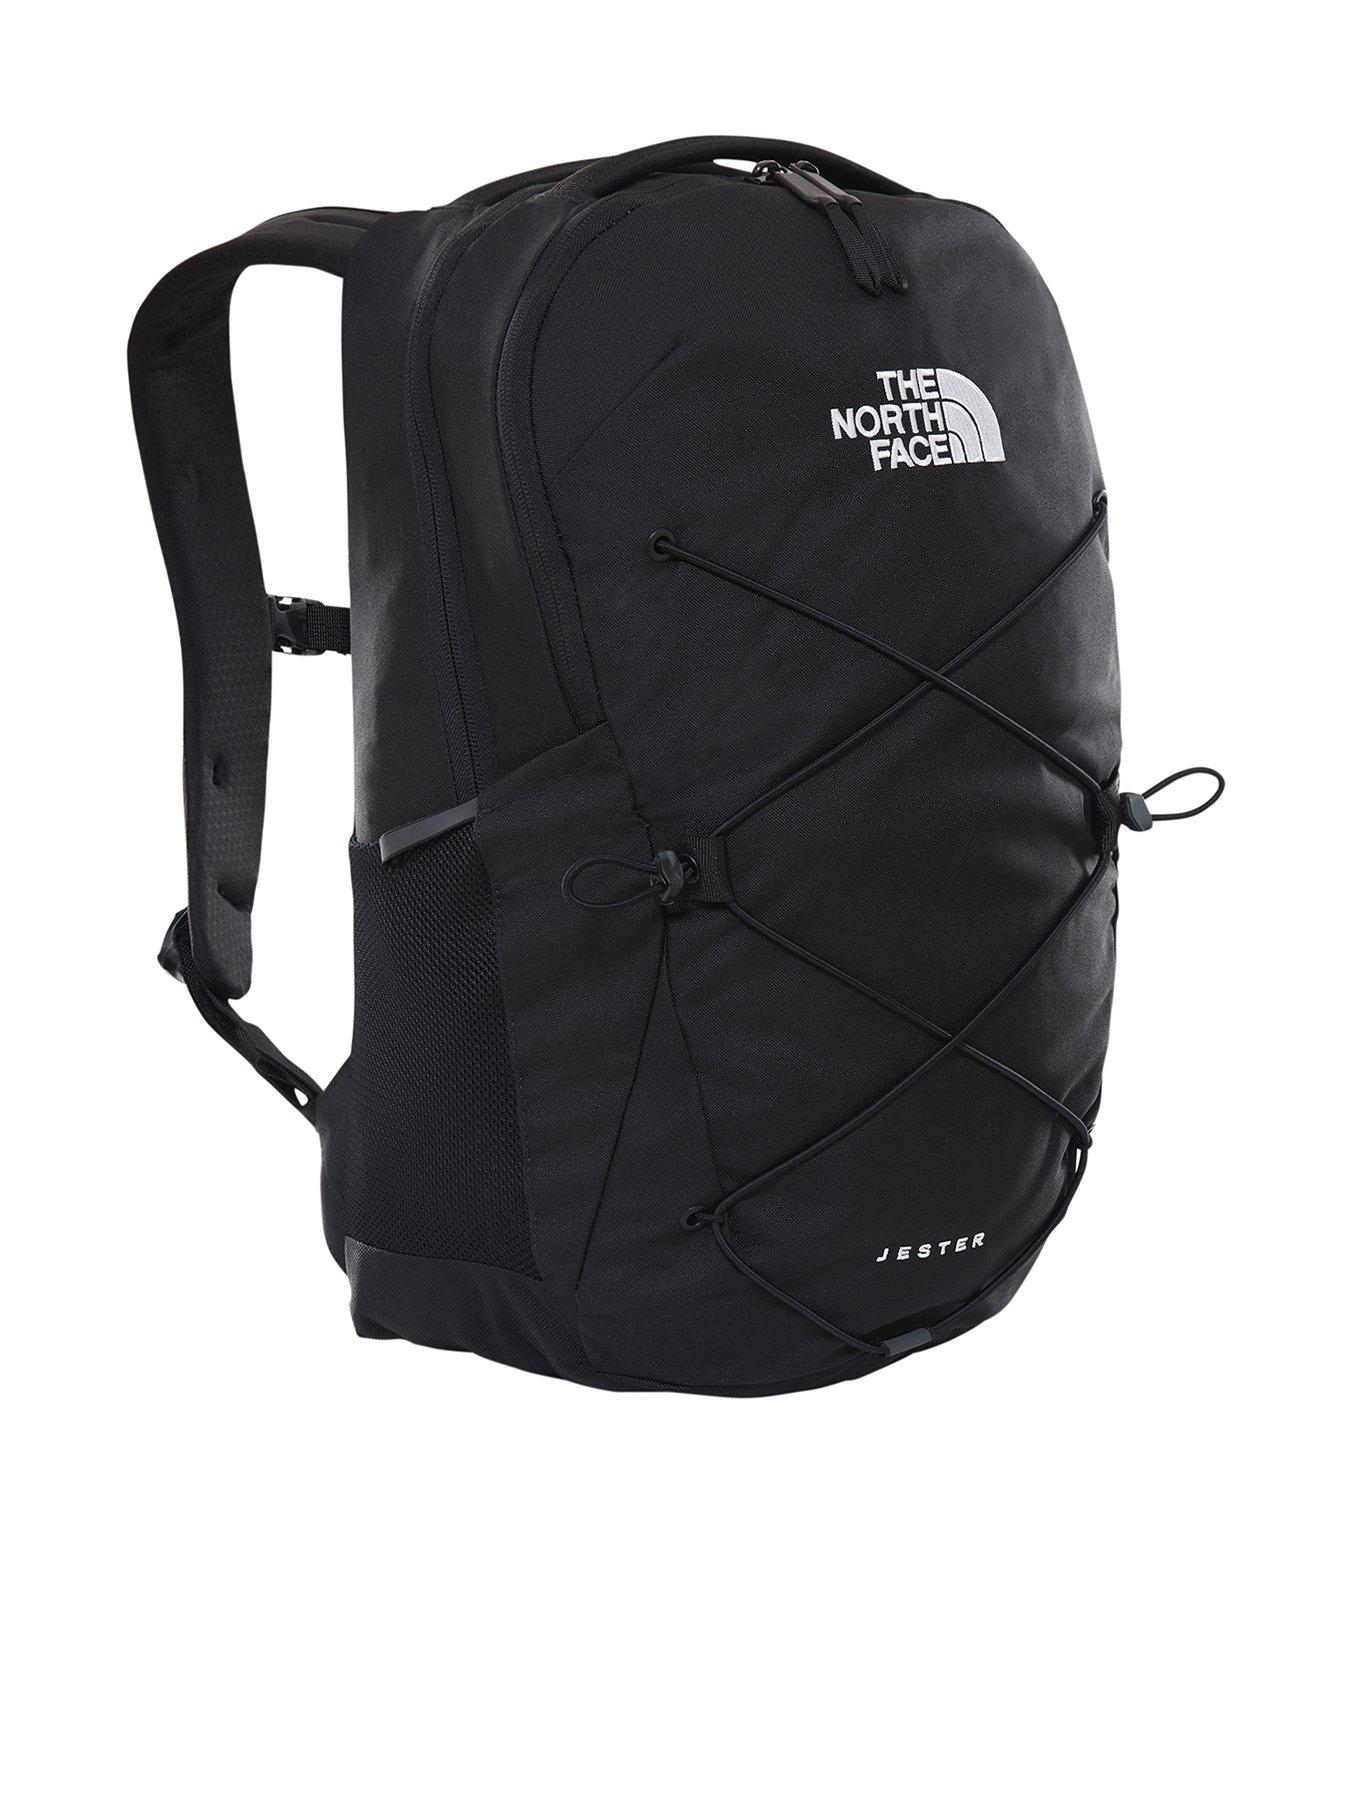 the north face backpack sale uk